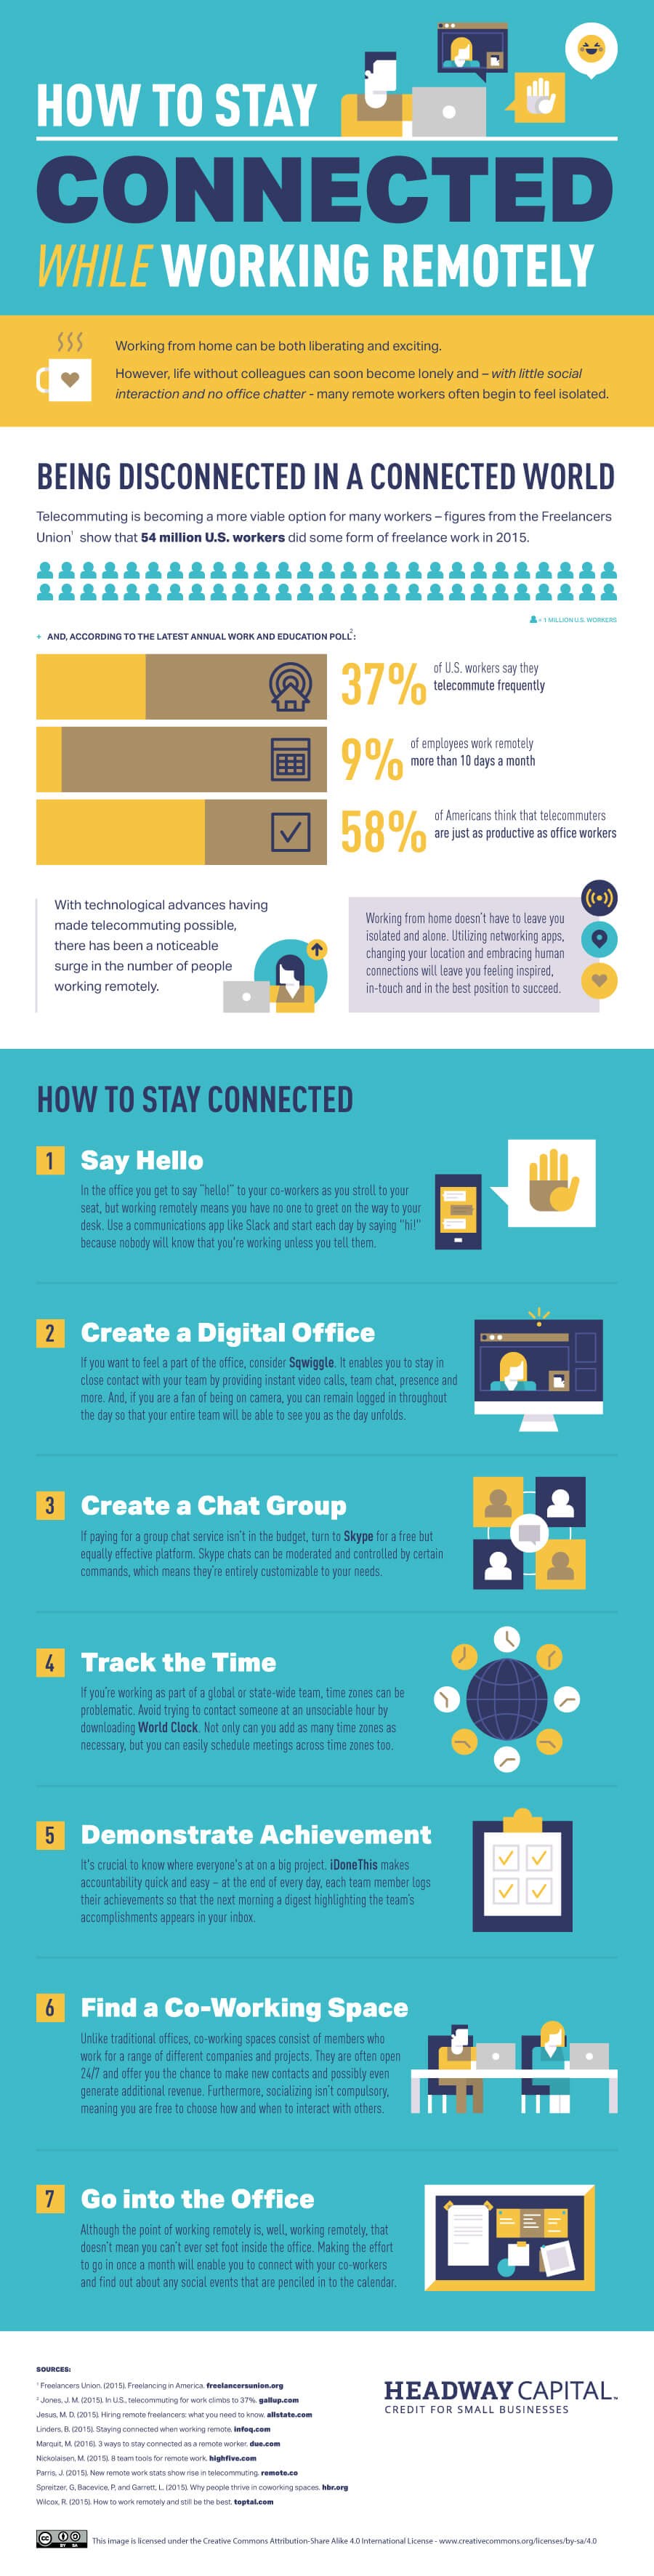 How to Stay Connected While Working Remotely - #infographic